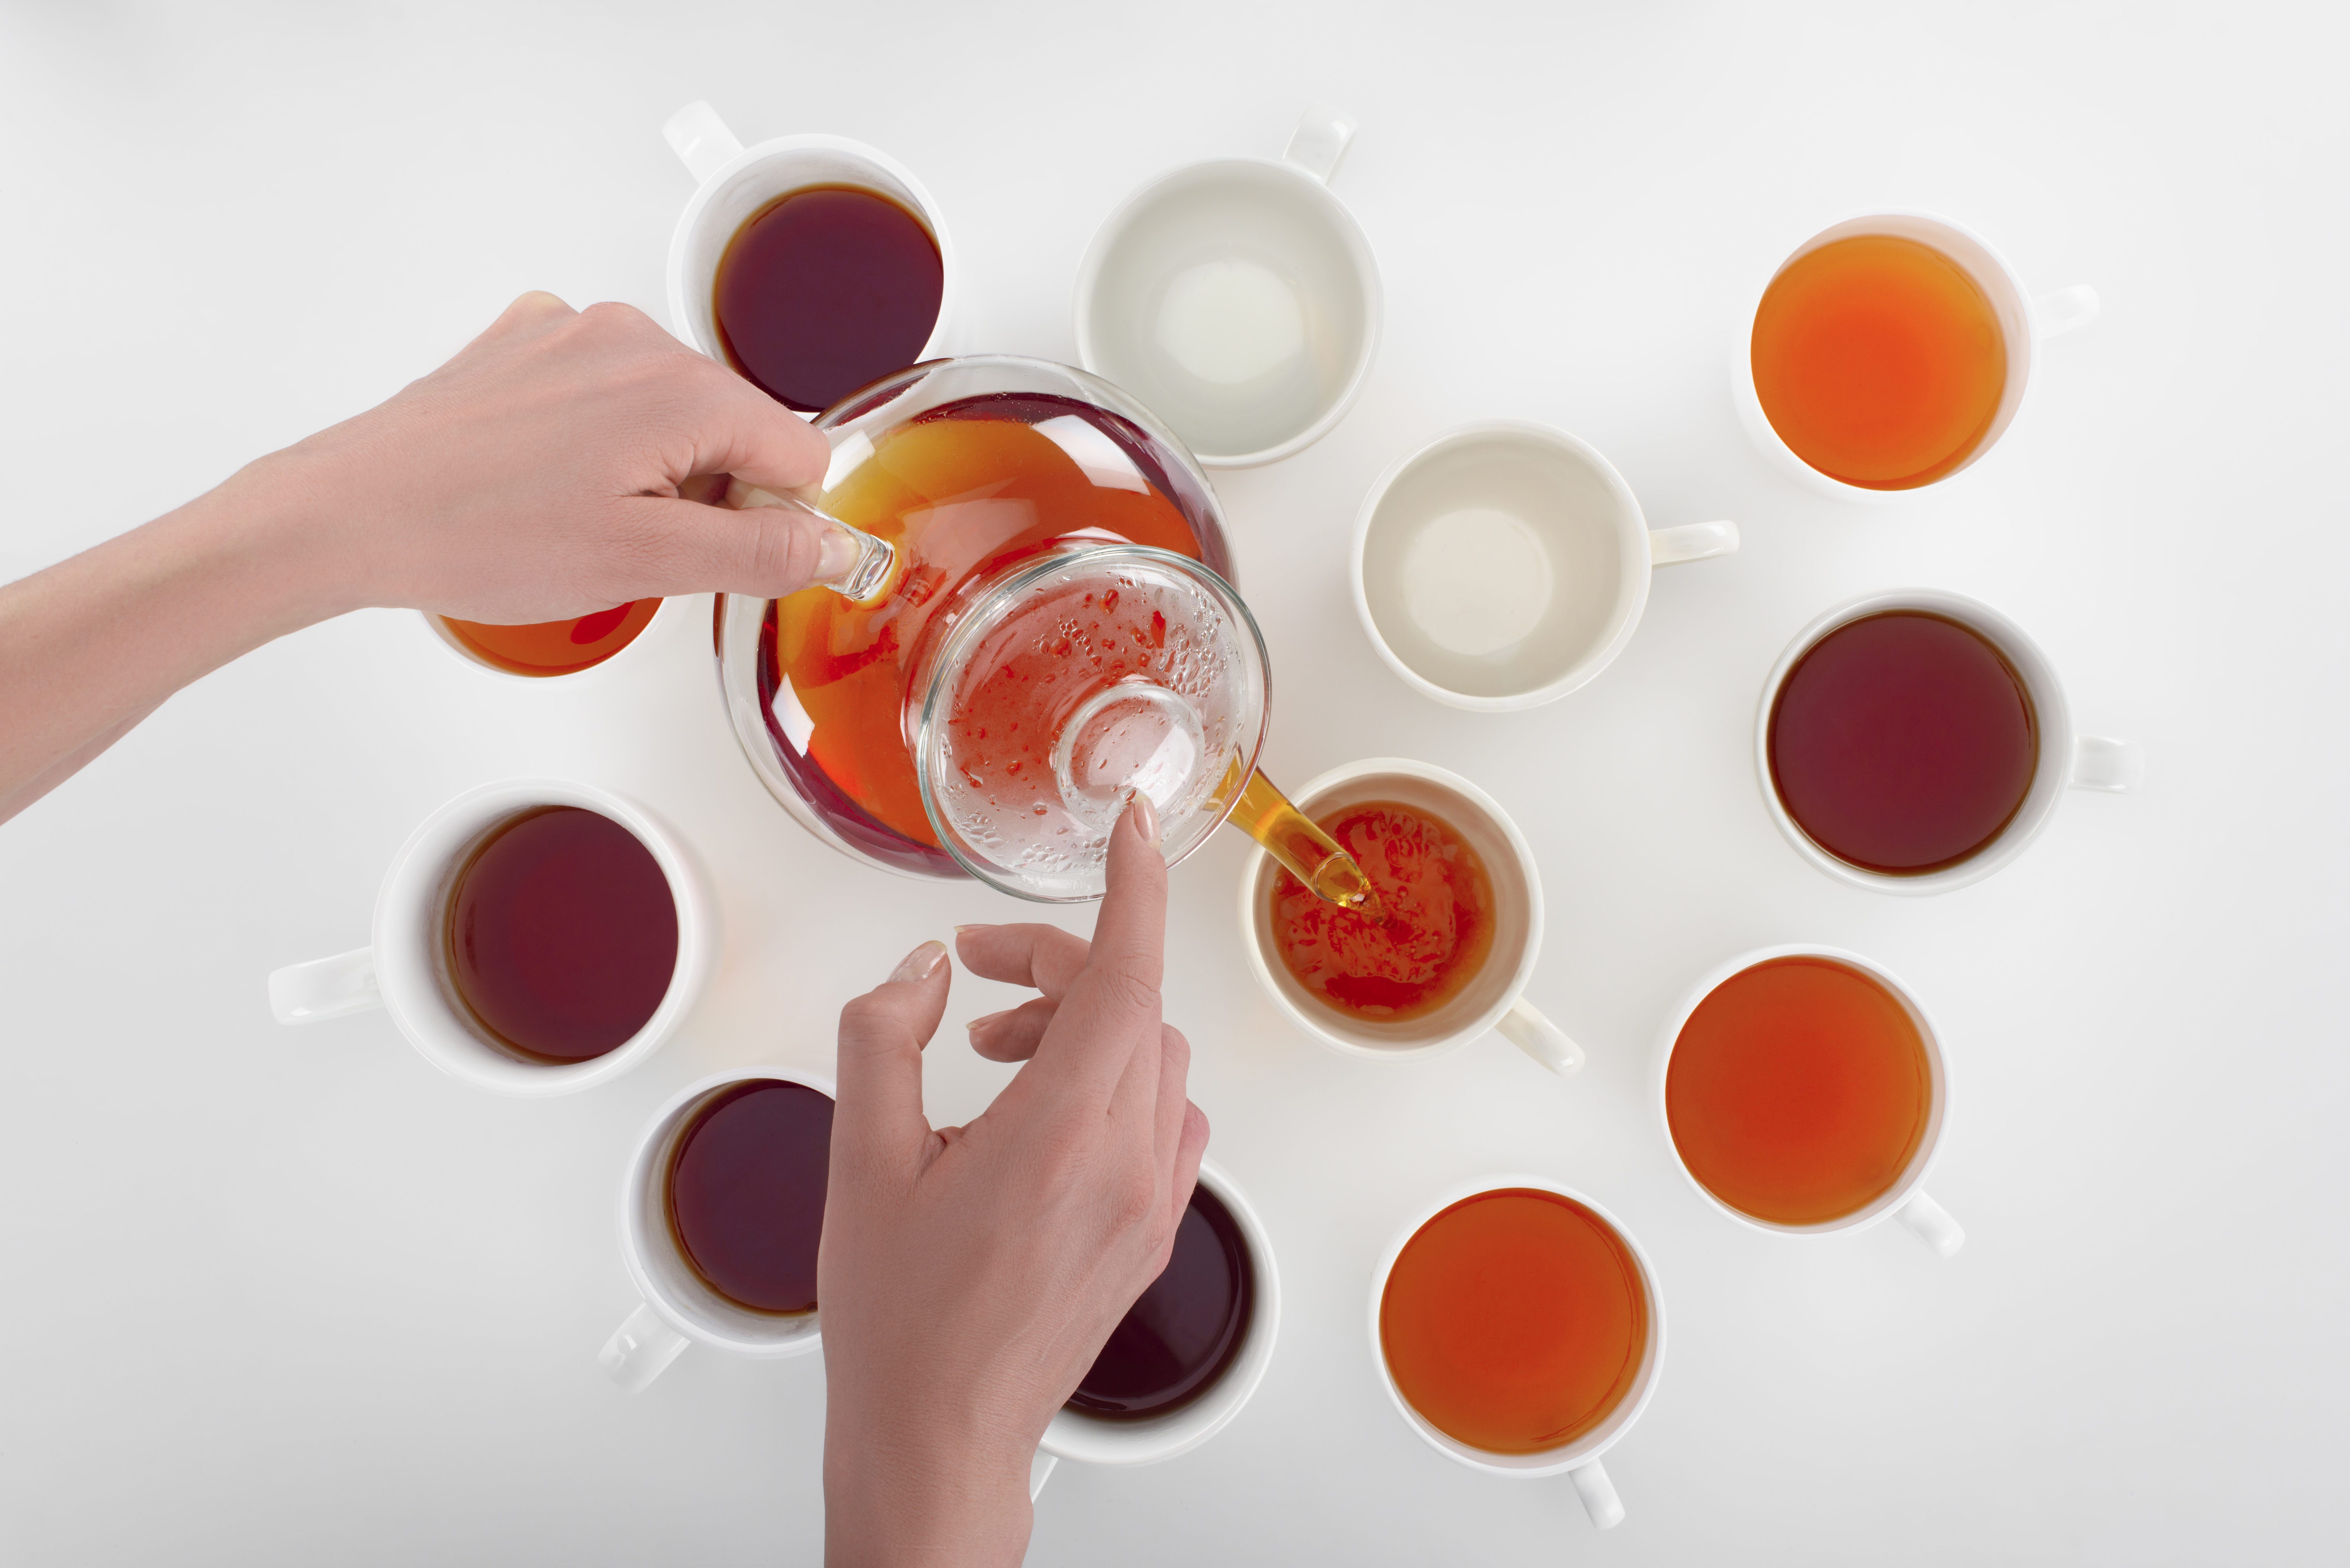 10 teas you didn't know you should be drinking